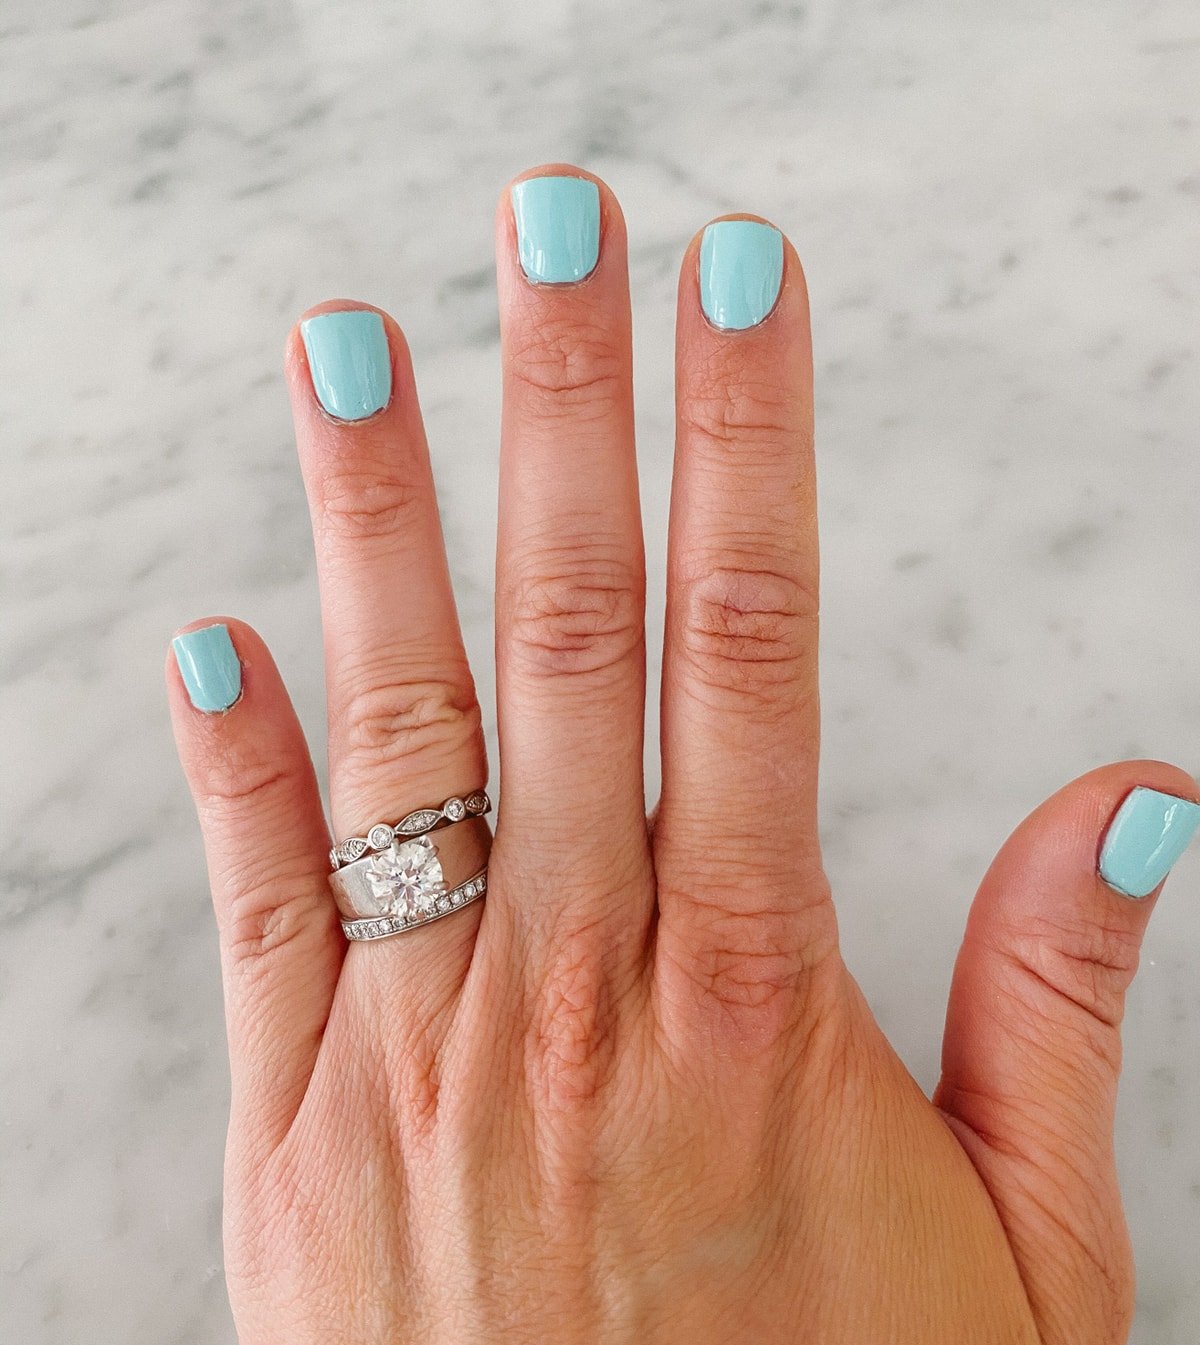 5 step Shellac hack PERFECTED using only 3 products! (2020 update